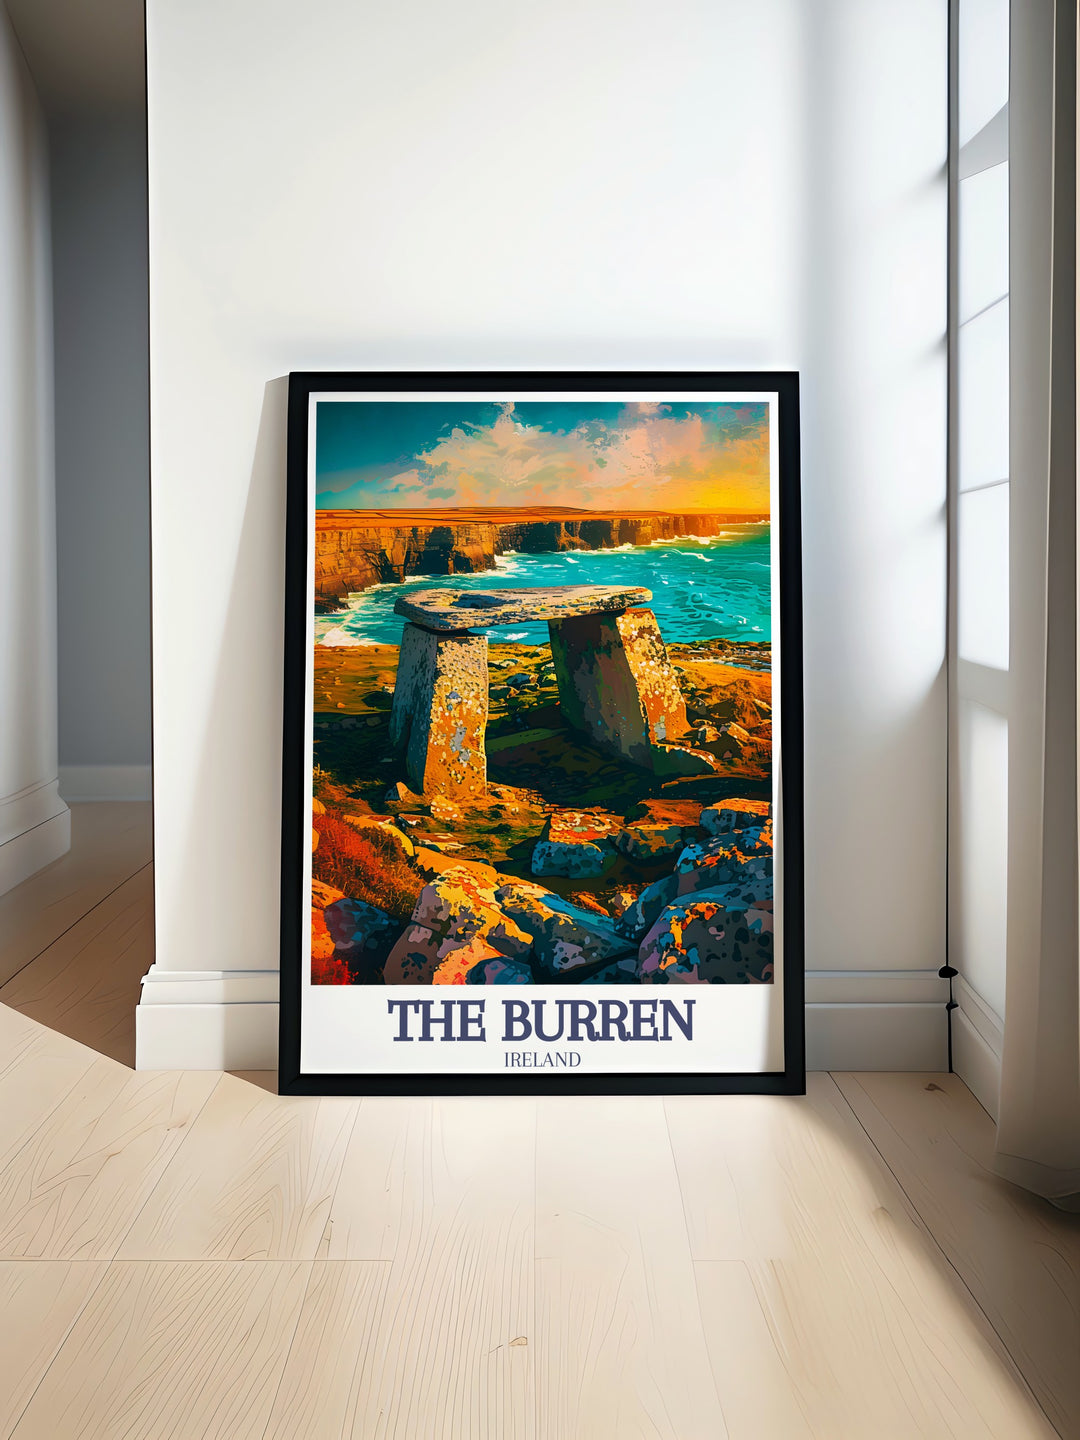 Stunning art print of Burren National Park and Poulnabrone Dolmen Wild Atlantic Way in County Clare showcasing the natural beauty of Irelands rugged landscape perfect for wall decor and a thoughtful gift